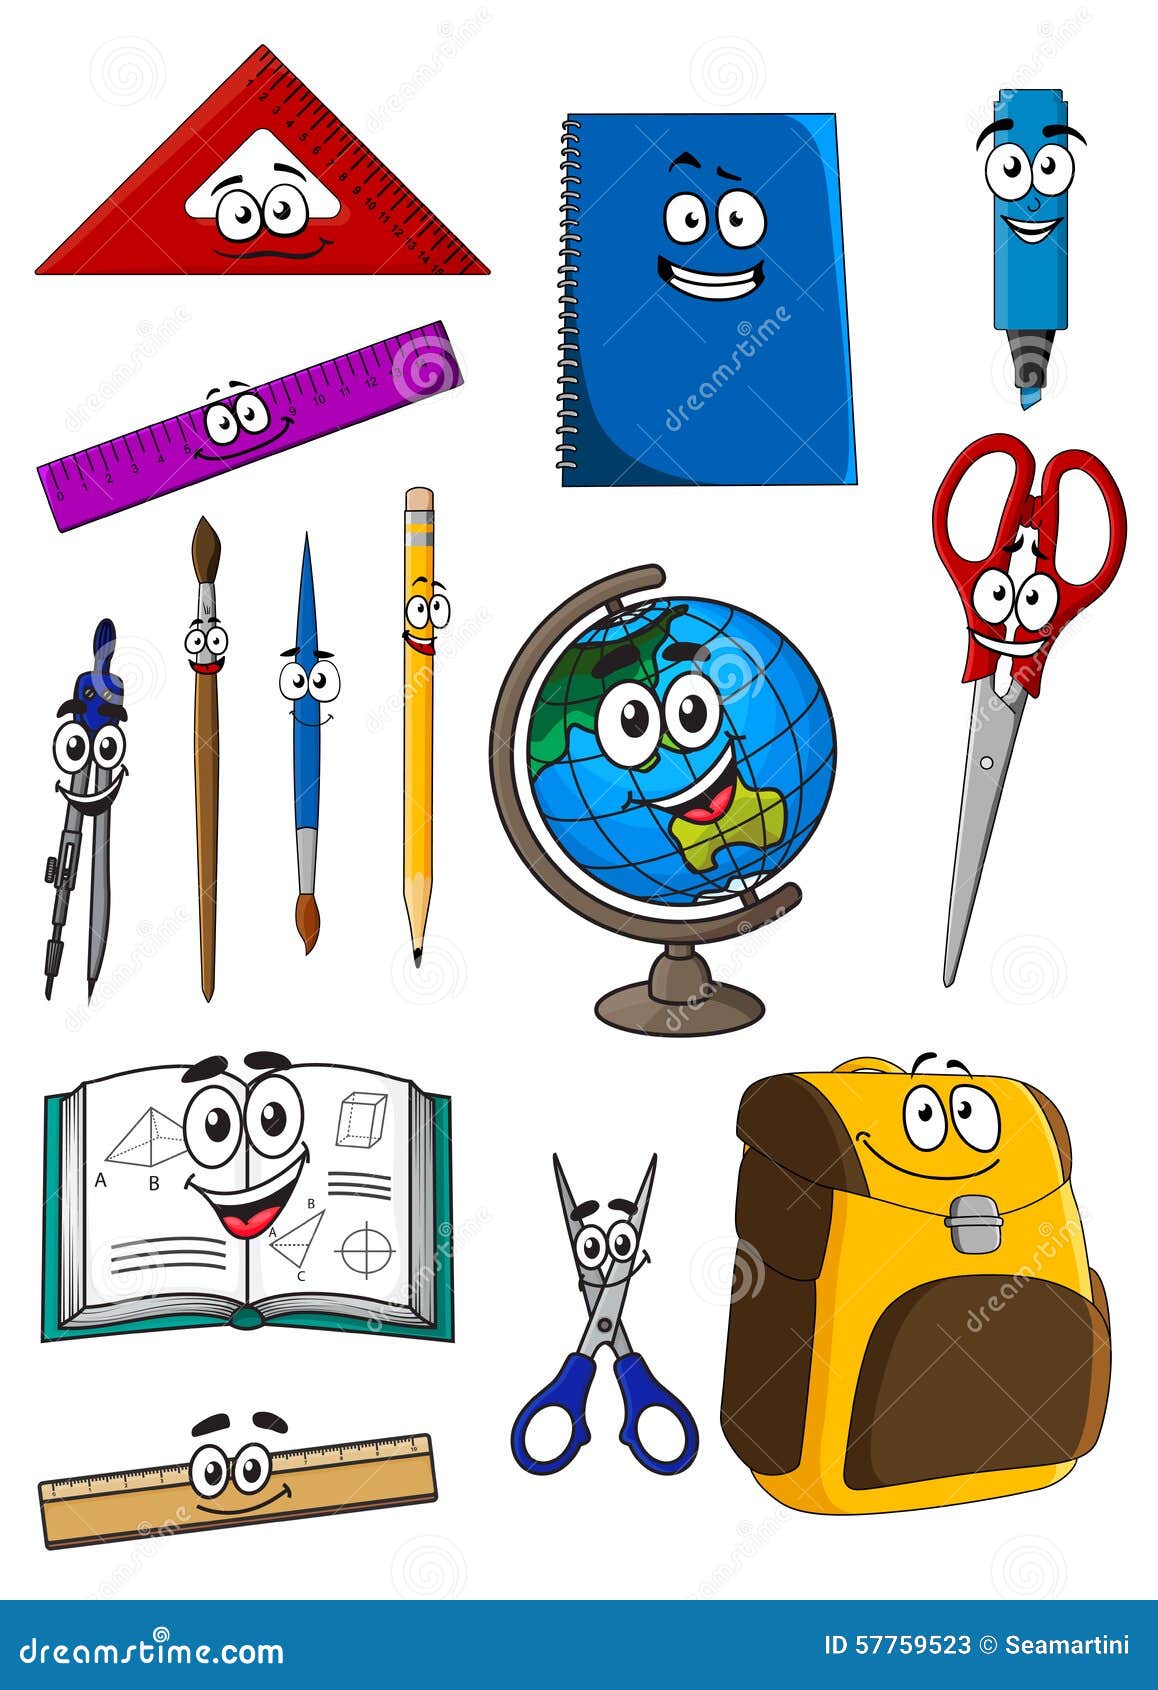 happy cartoon school supplies characters backpack textbook notebook scissors globe rulers triangle highlighter pencil compasses 57759523